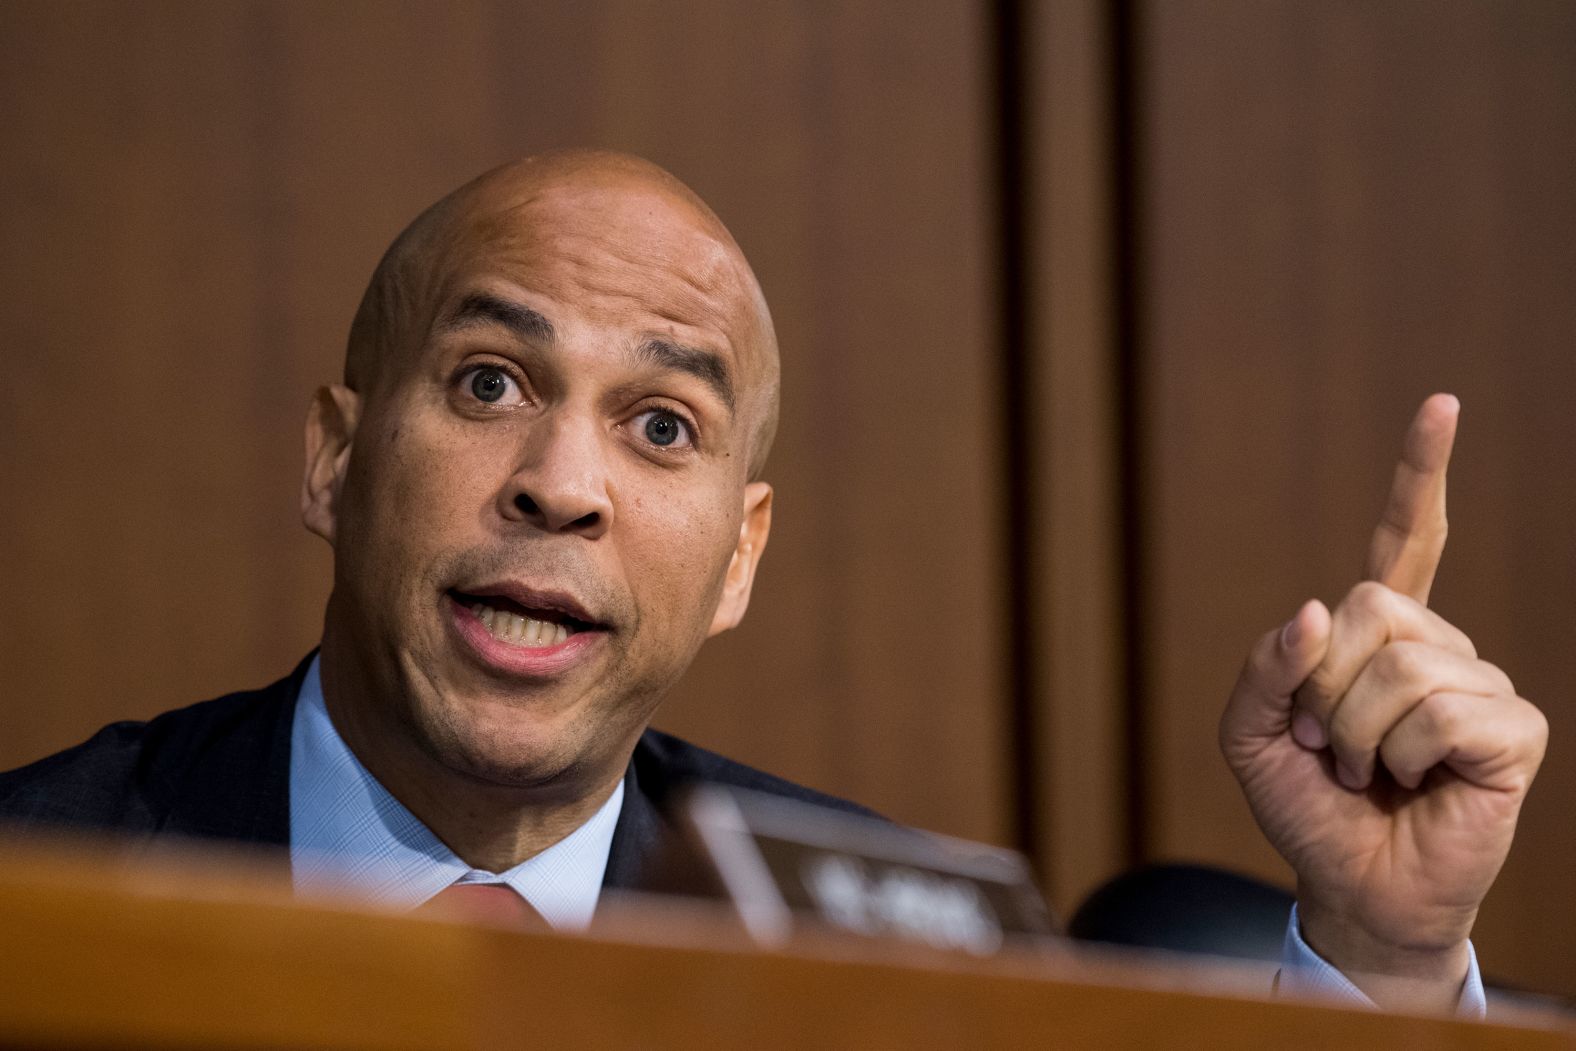 Sen. Cory Booker threatens to release committee-confidential documents on Thursday. Booker <a href="index.php?page=&url=https%3A%2F%2Fwww.cnn.com%2F2018%2F09%2F06%2Fpolitics%2Fkavanaugh-hearing-document-booker-testimony%2Findex.html" target="_blank">said he was willing to break Senate rules</a> and resort to civil disobedience by releasing a document that is only available to the committee about racial profiling.